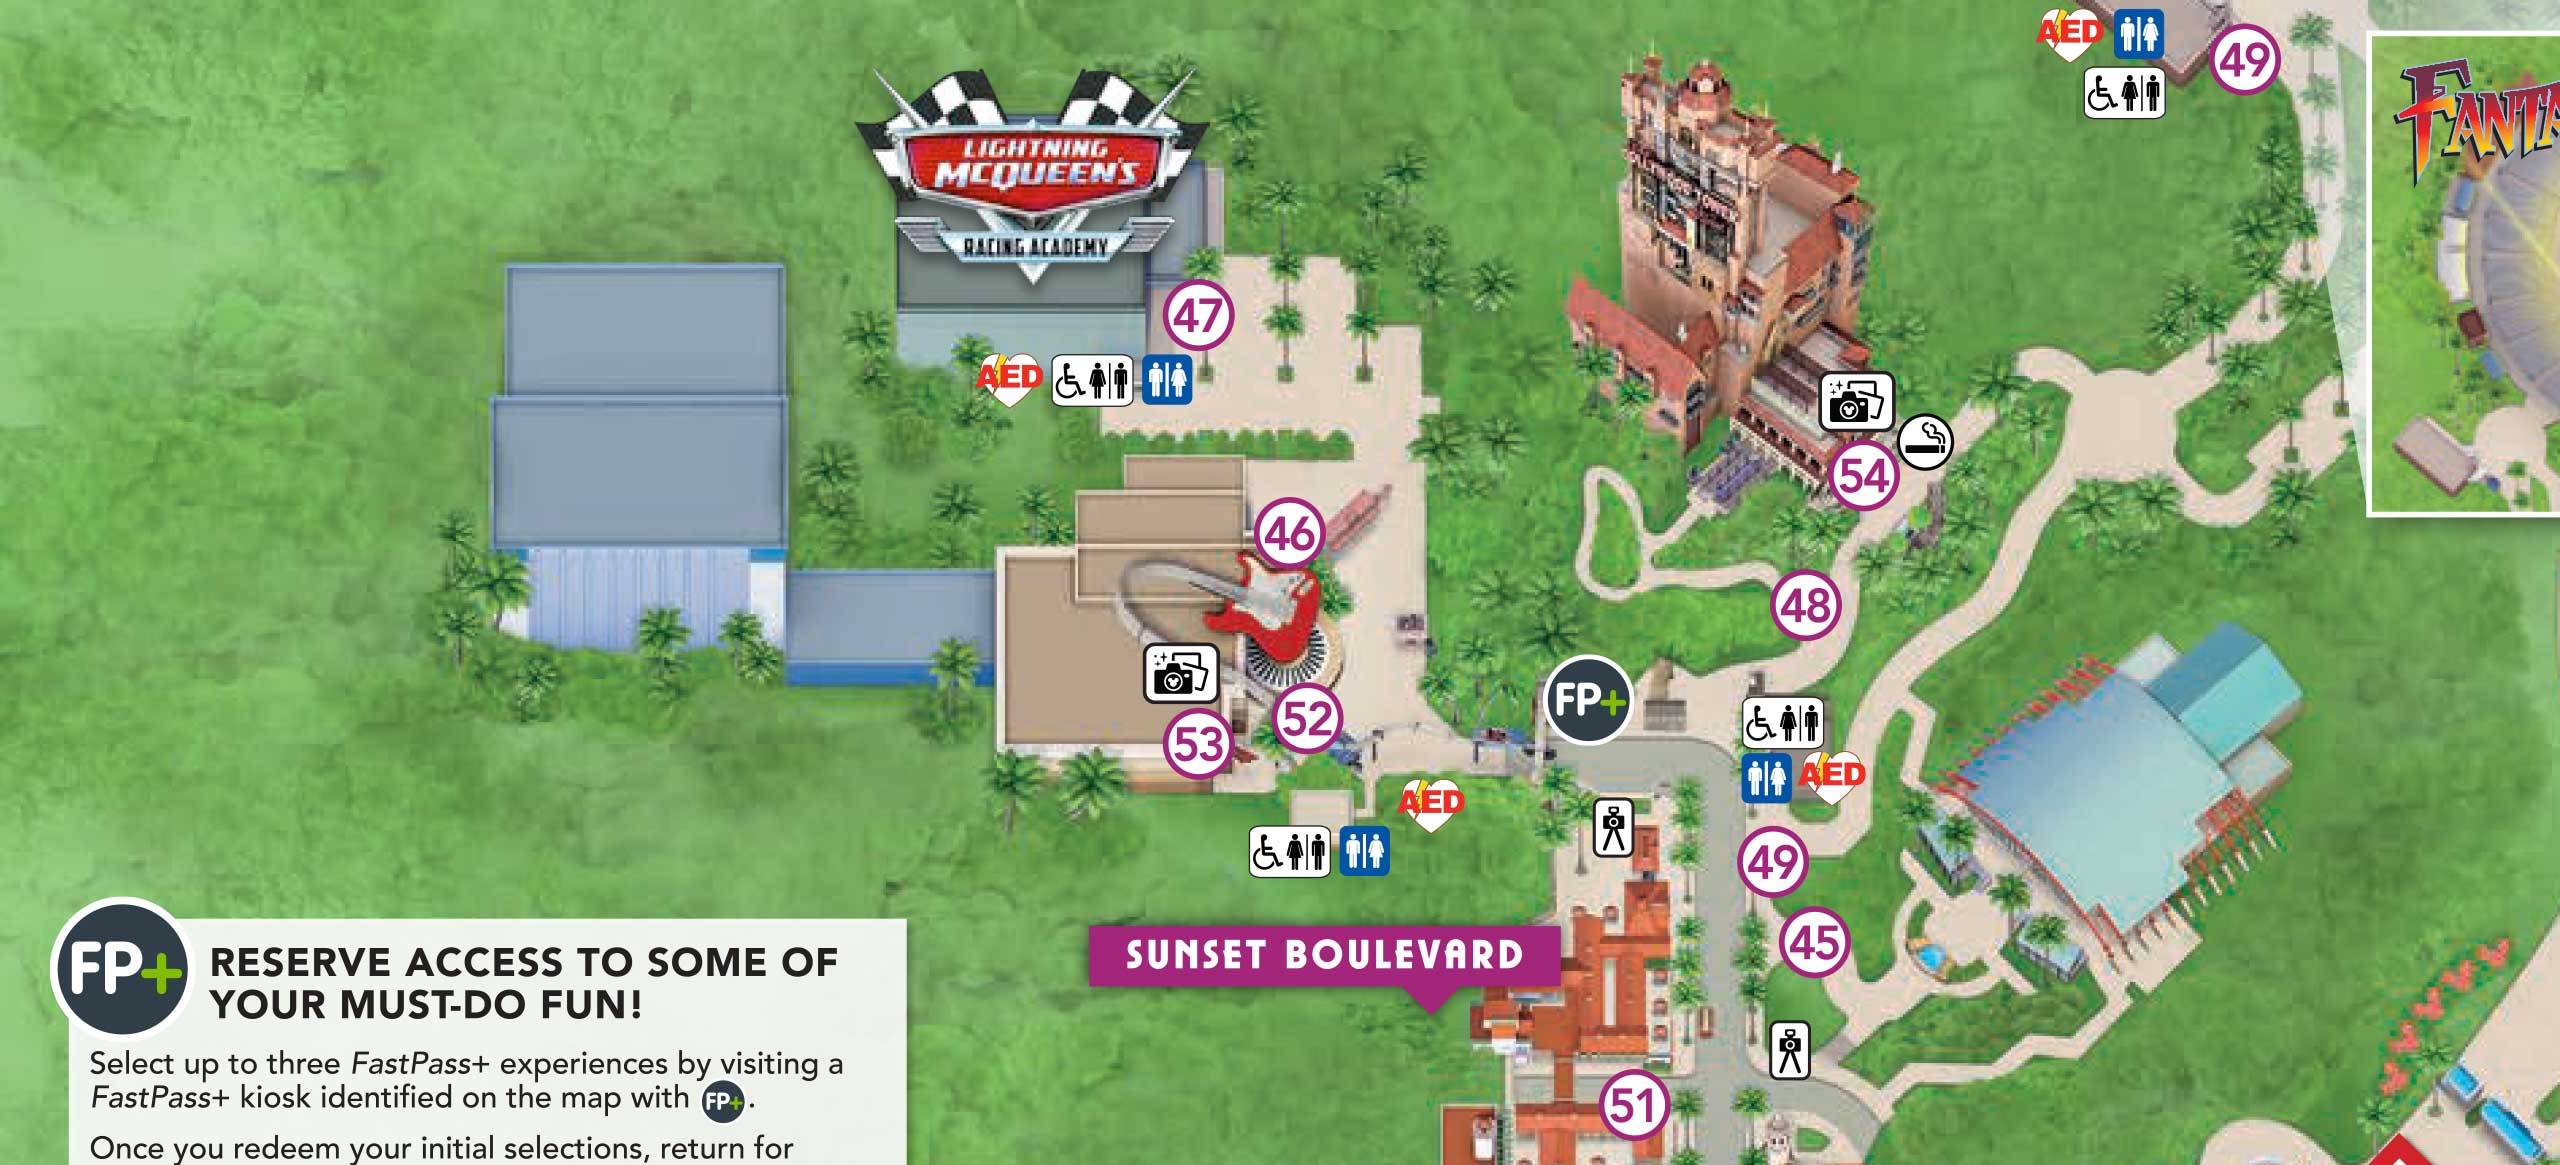 Lightning McQueen's Racing Academy shown on the new guide map